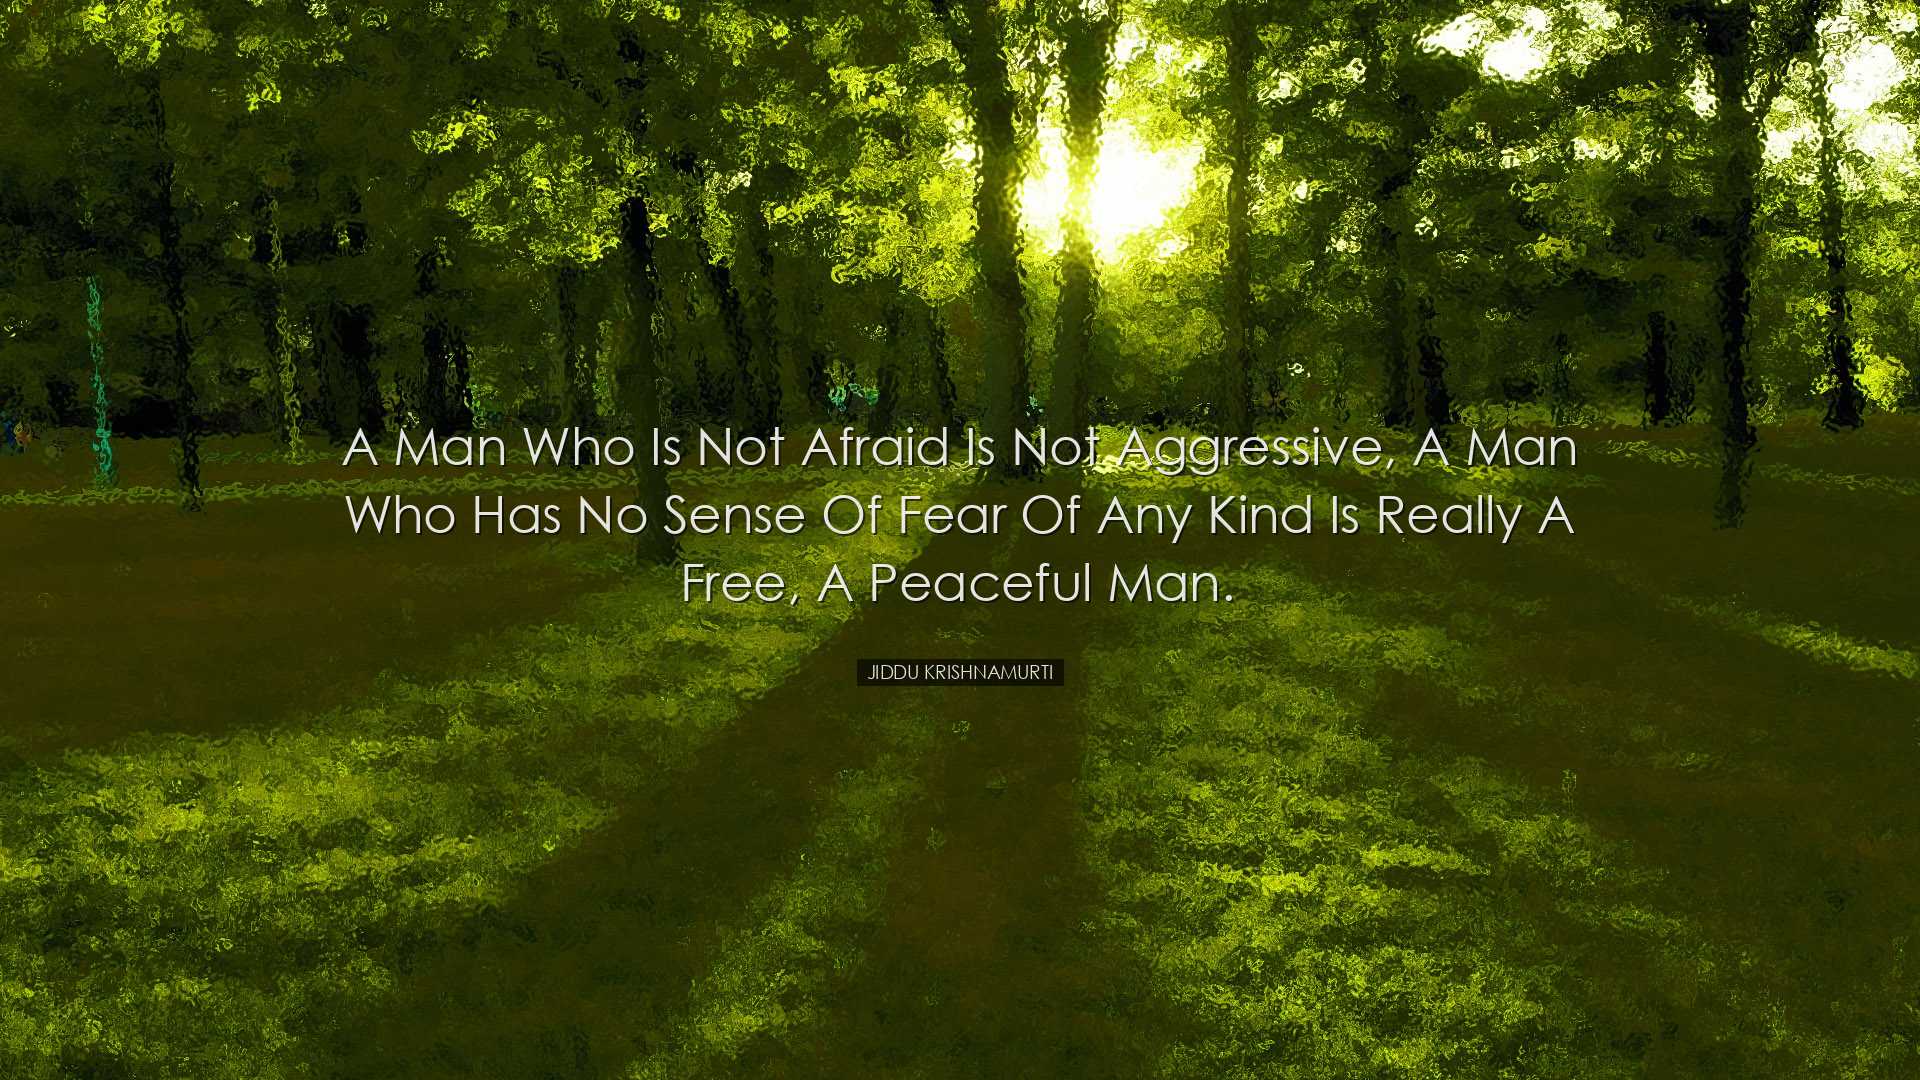 A man who is not afraid is not aggressive, a man who has no sense